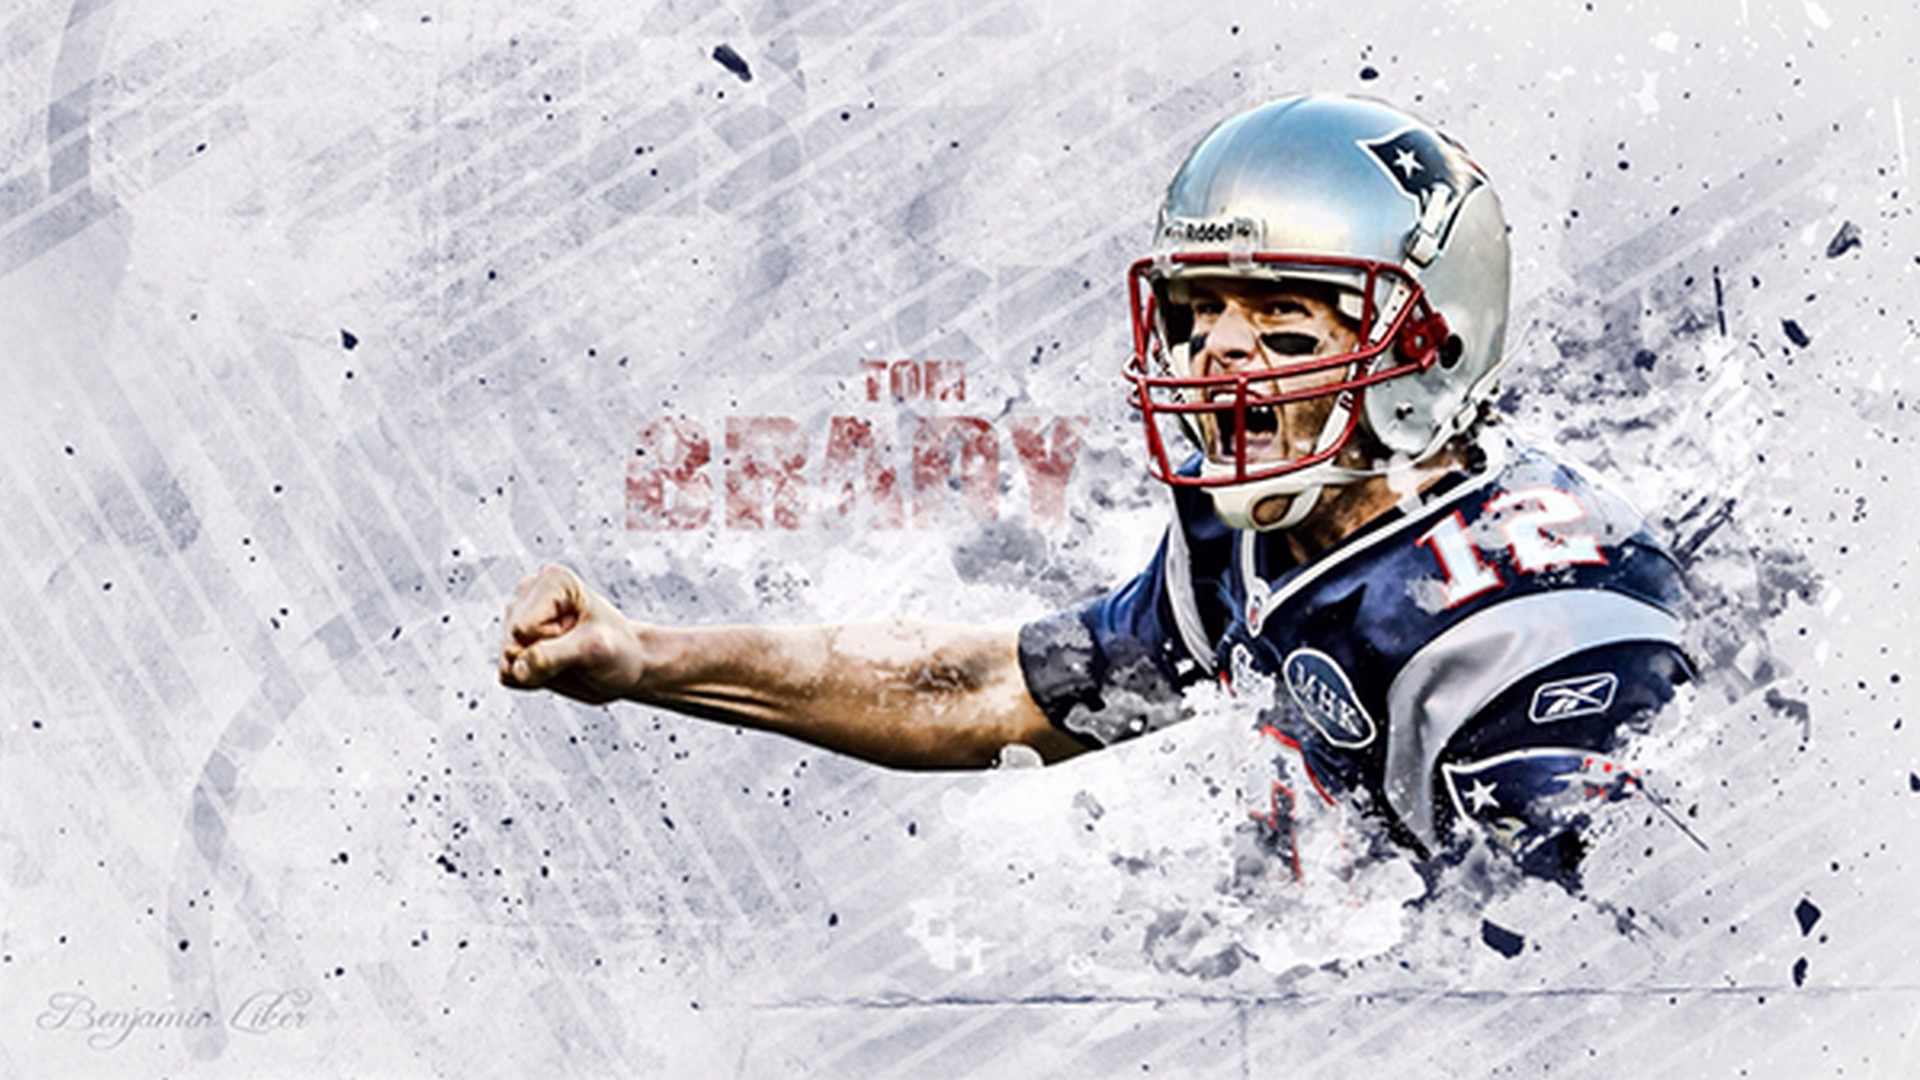 Wallpaper HD Tom Brady Goat with image resolution 1920x1080 pixel. You can make this wallpaper for your Desktop Computer Backgrounds, Mac Wallpapers, Android Lock screen or iPhone Screensavers